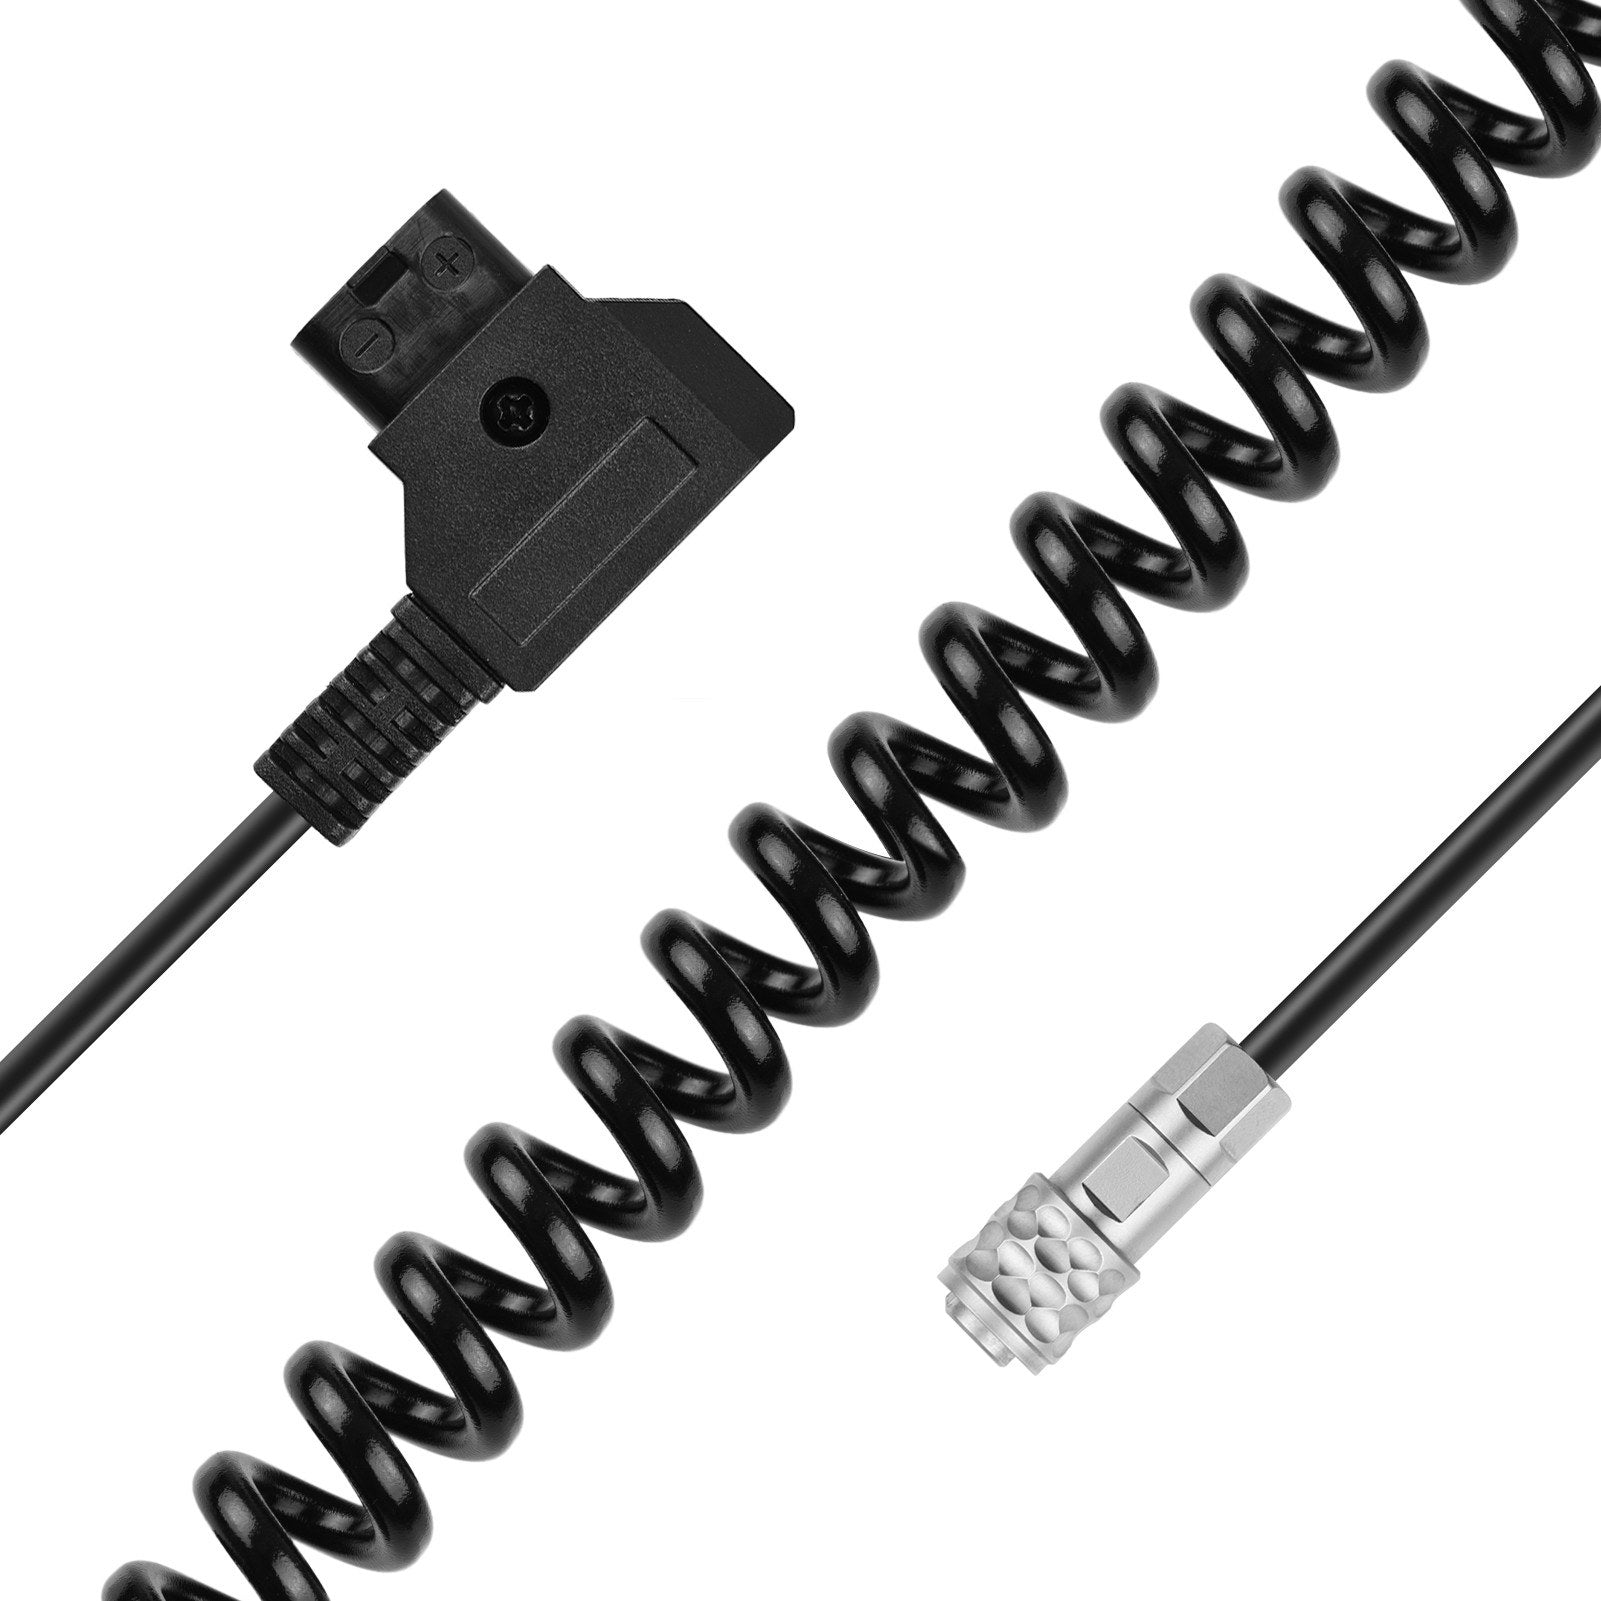 Coiled D-Tap to BMPCC 4K/6K Weipu Power Cable Compatible with Blackmagic Pocket Cinema Camera